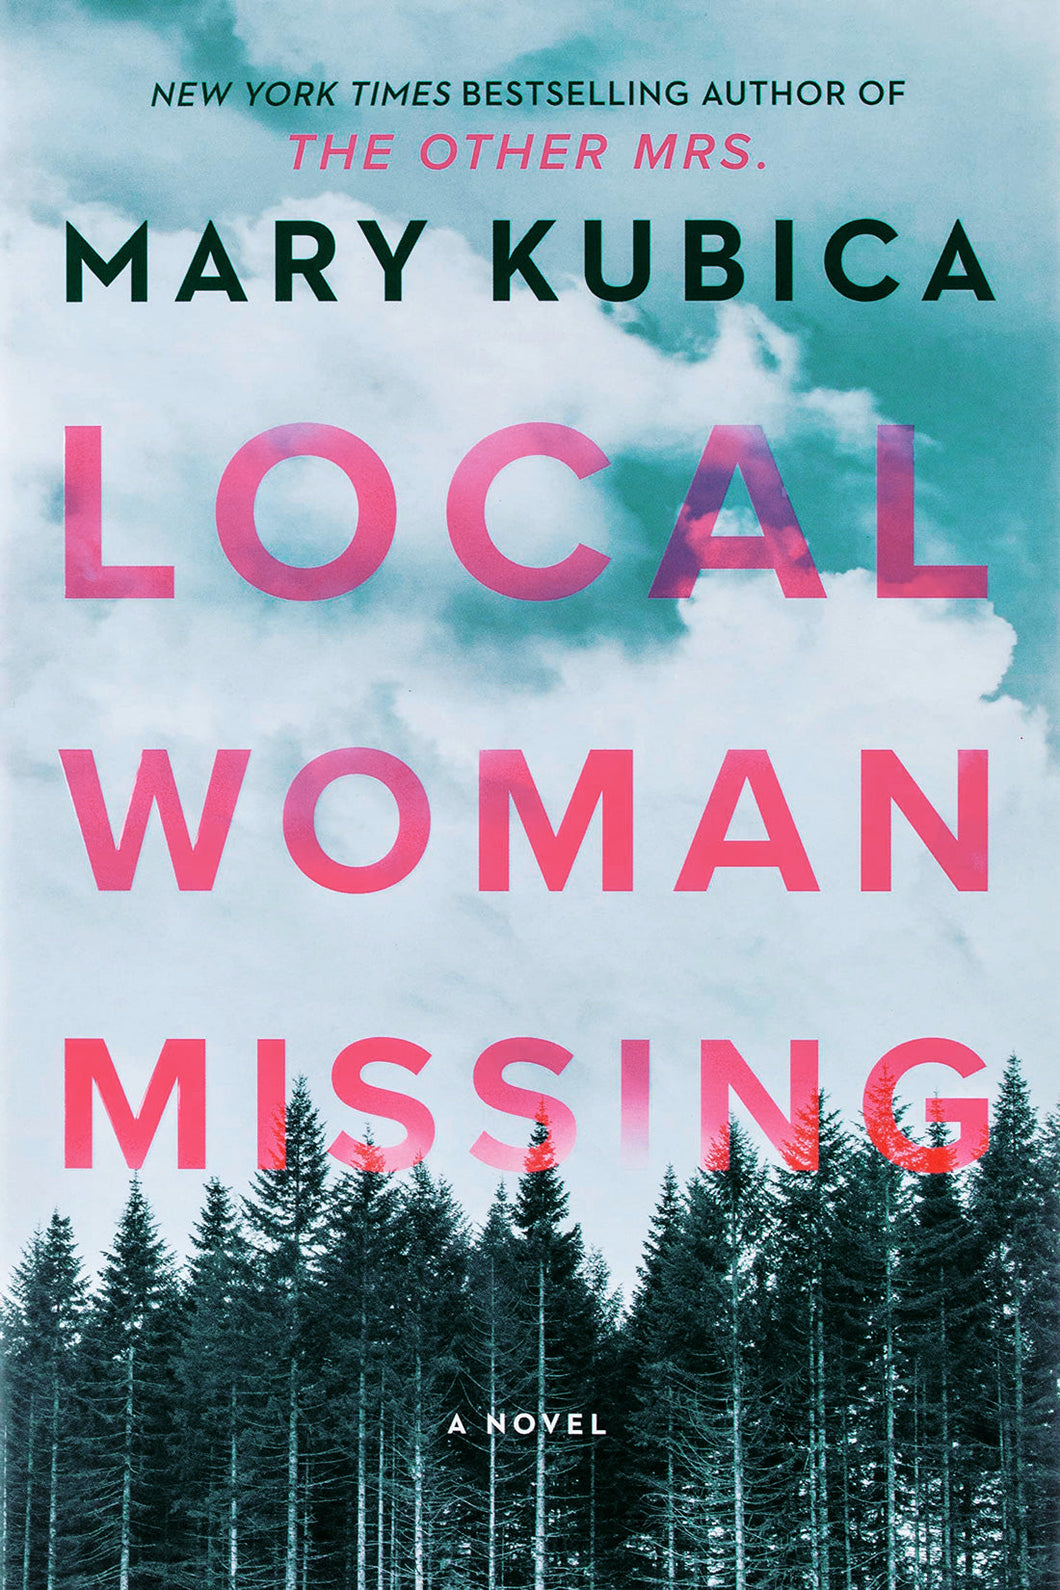 Local Woman Missing by Mary Kubica / BOOK OR BUNDLE - Starting at $17!